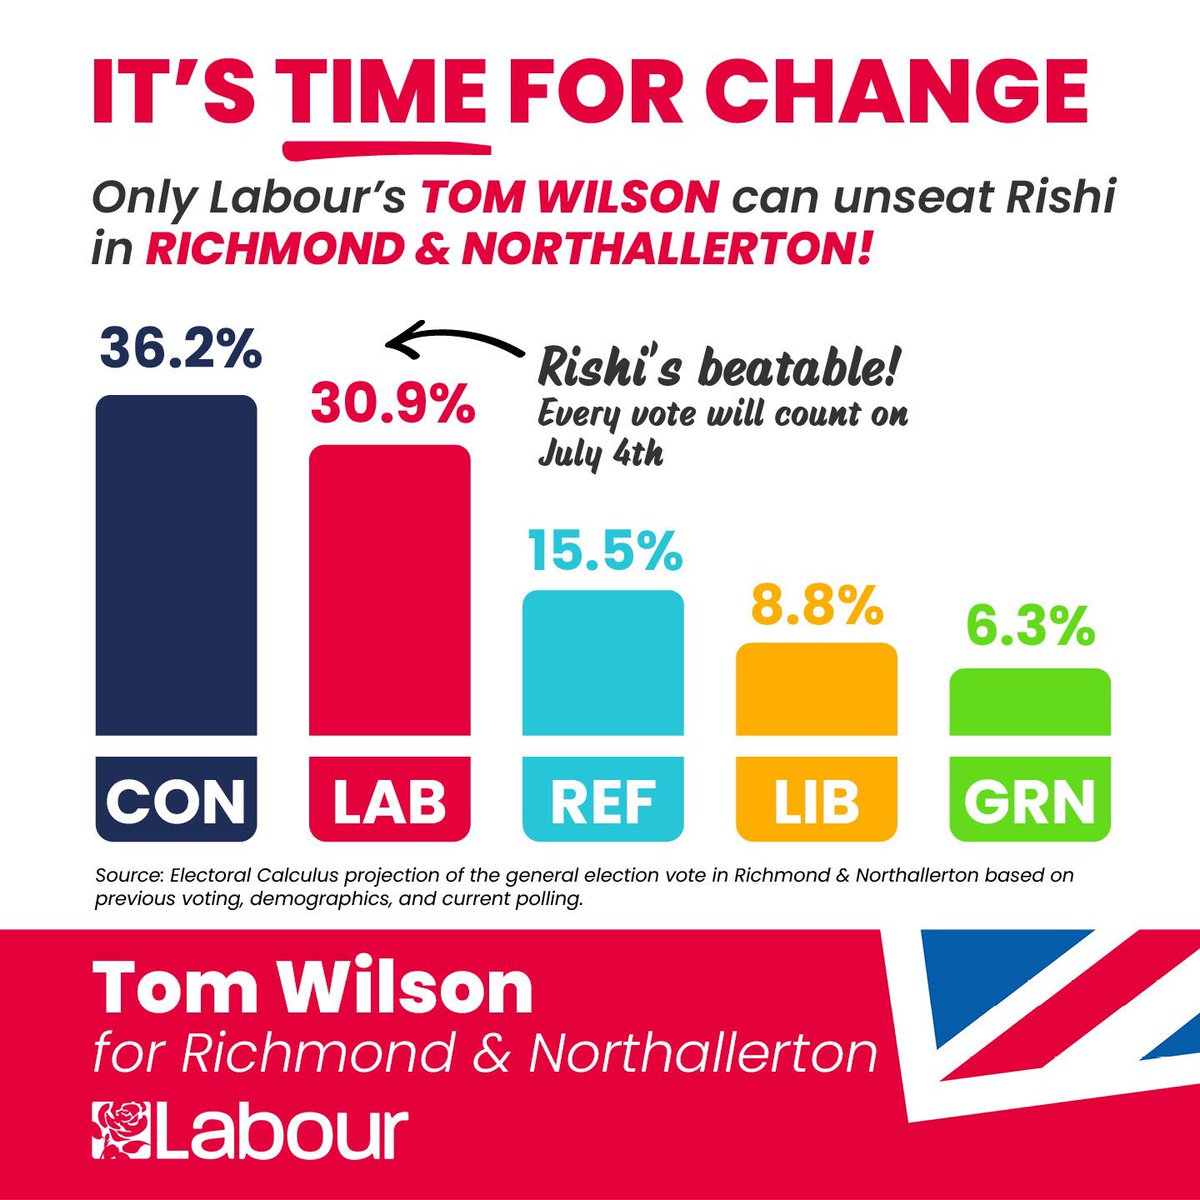 Having won the North Yorkshire mayoralty in May, Labour is raring to go and I'm running to provide a real, credible choice for voters in Richmond and Northallerton. 🌊 To crack down on sewage dumping in the Swale 🏥 To rescue our NHS 📈 To get Britain growing again #VoteLabour